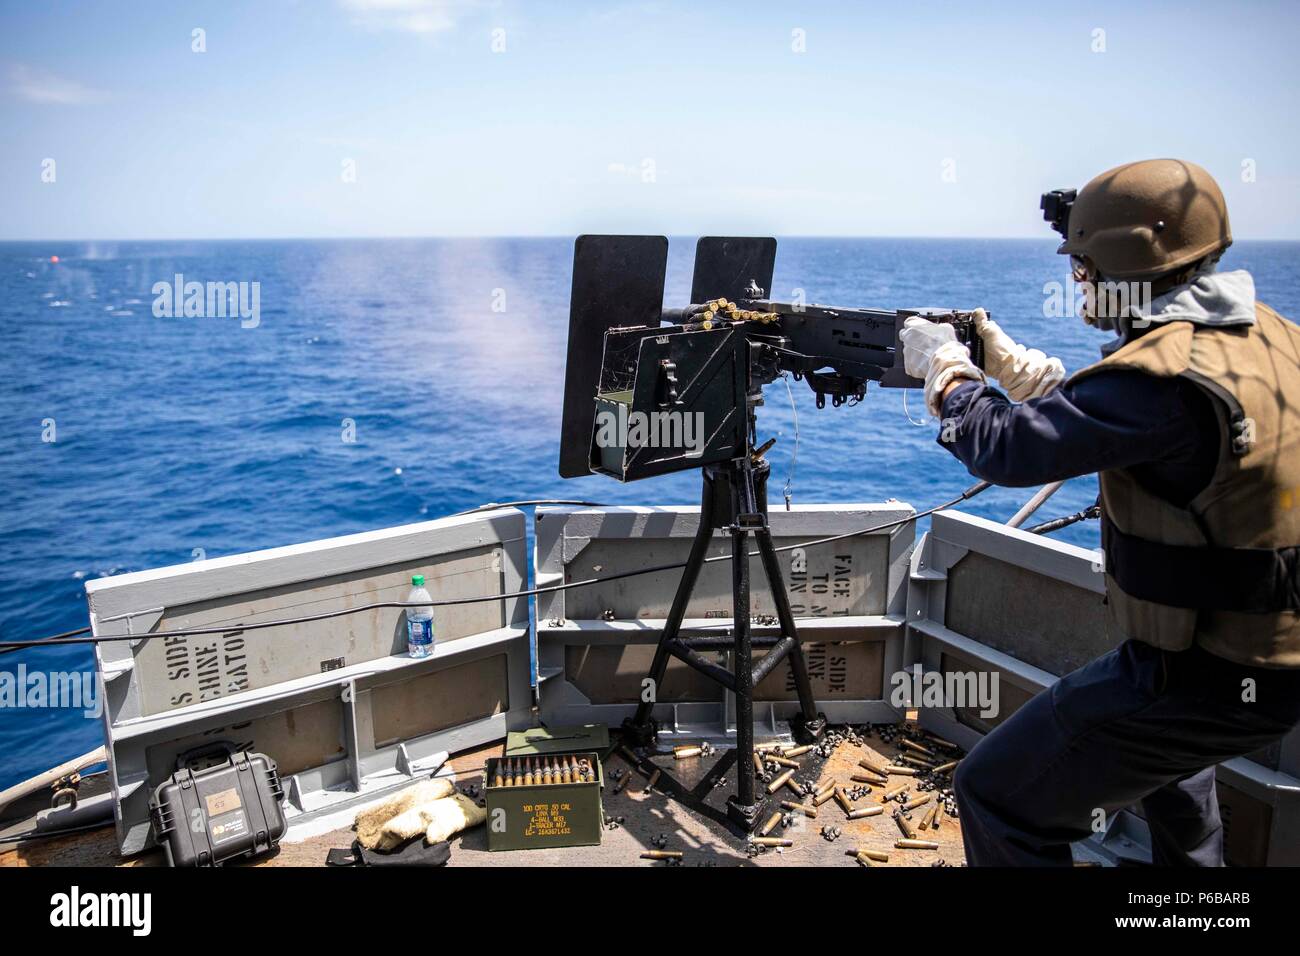 180623-N-KW492-0112 ATLANTIC OCEAN (June 23, 2018) Aviation Ordnanceman 3rd Class Alex Blanco fires a .50-caliber machine gun during an integrated live-fire weapons exercise aboard the Wasp-class amphibious assault ship USS Kearsarge (LHD 3) as part of Surface Warfare Advanced Tactical Training (SWATT). The Kearsarge Amphibious Ready Group is completing the Navy’s first East Coast SWATT exercise. SWATT is led by the Naval Surface and Mine Warfighting Development Center and is designed to increase warfighting proficiency, lethality, and interoperability of participating units. (U.S. Navy Photo  Stock Photo